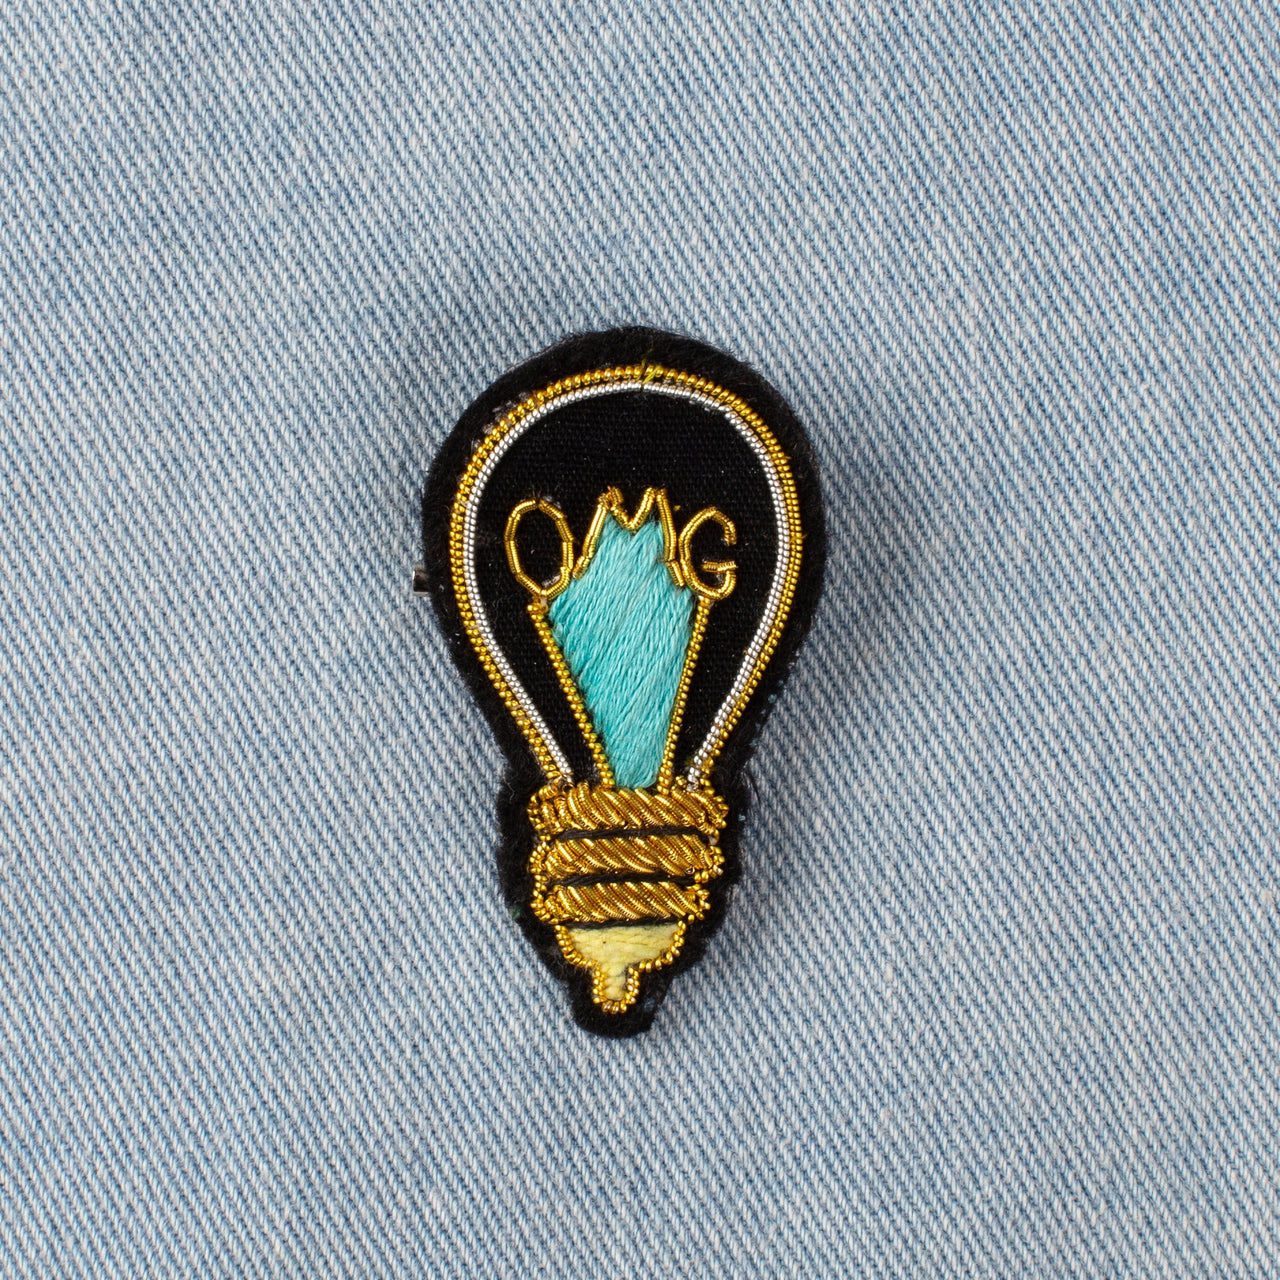 Embroidered Pin - OMG